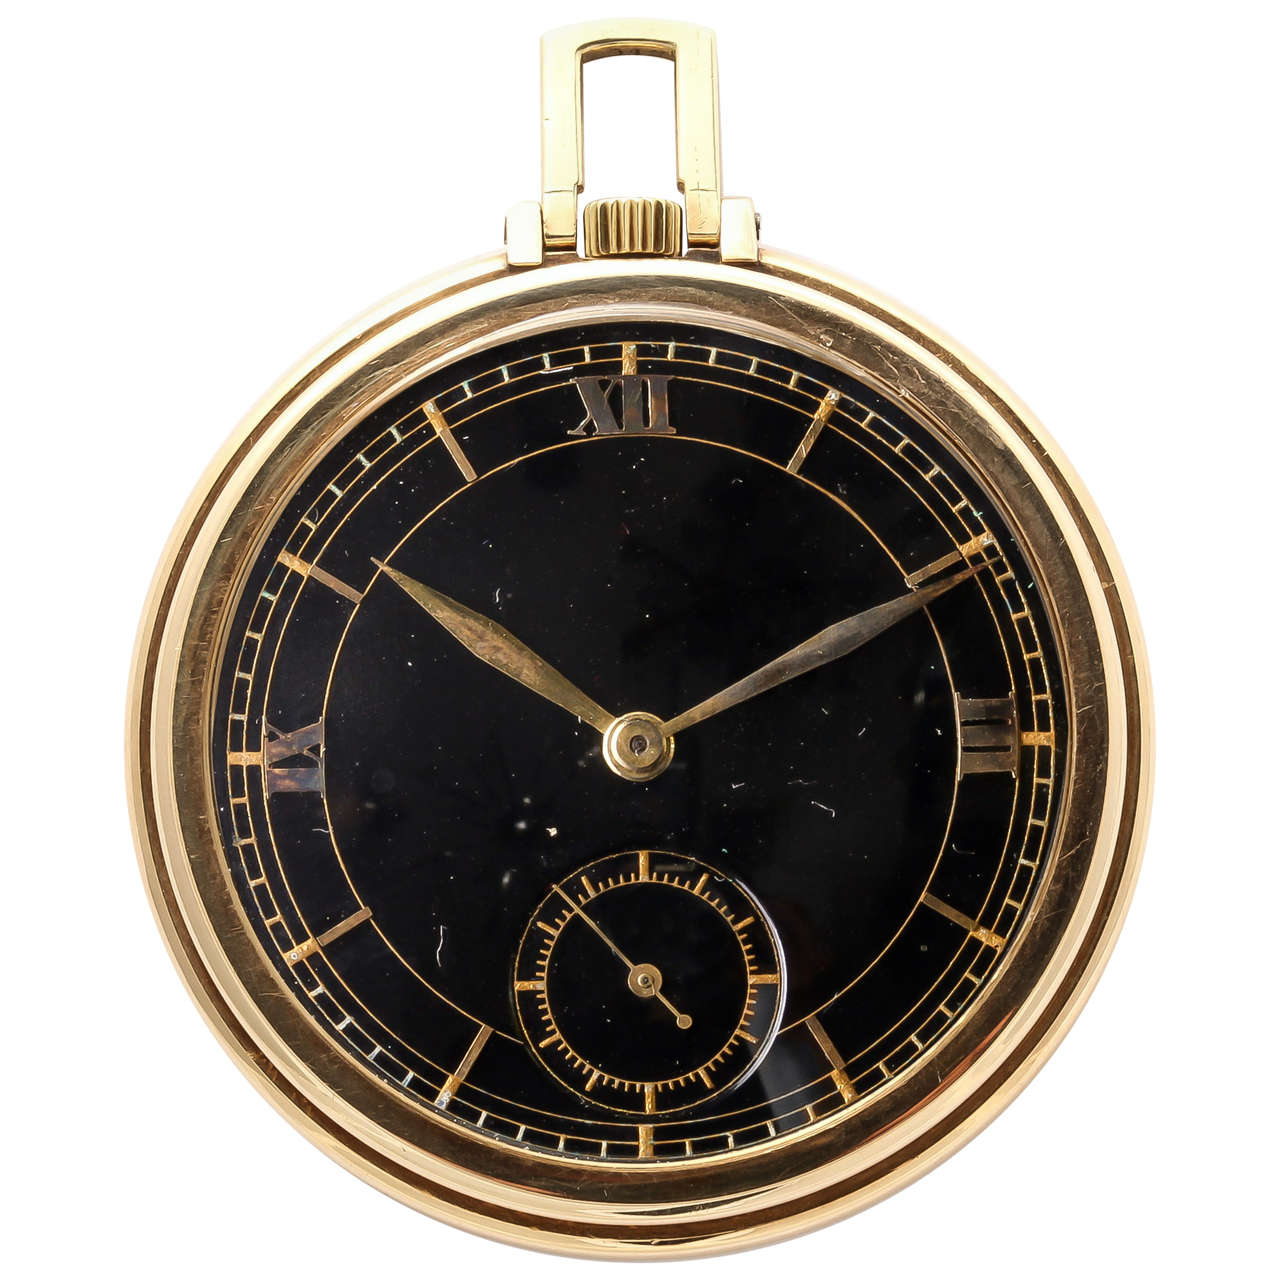 Jaeger-LeCoultre Yellow Gold Pocket Watch with Black Dial circa 1940s